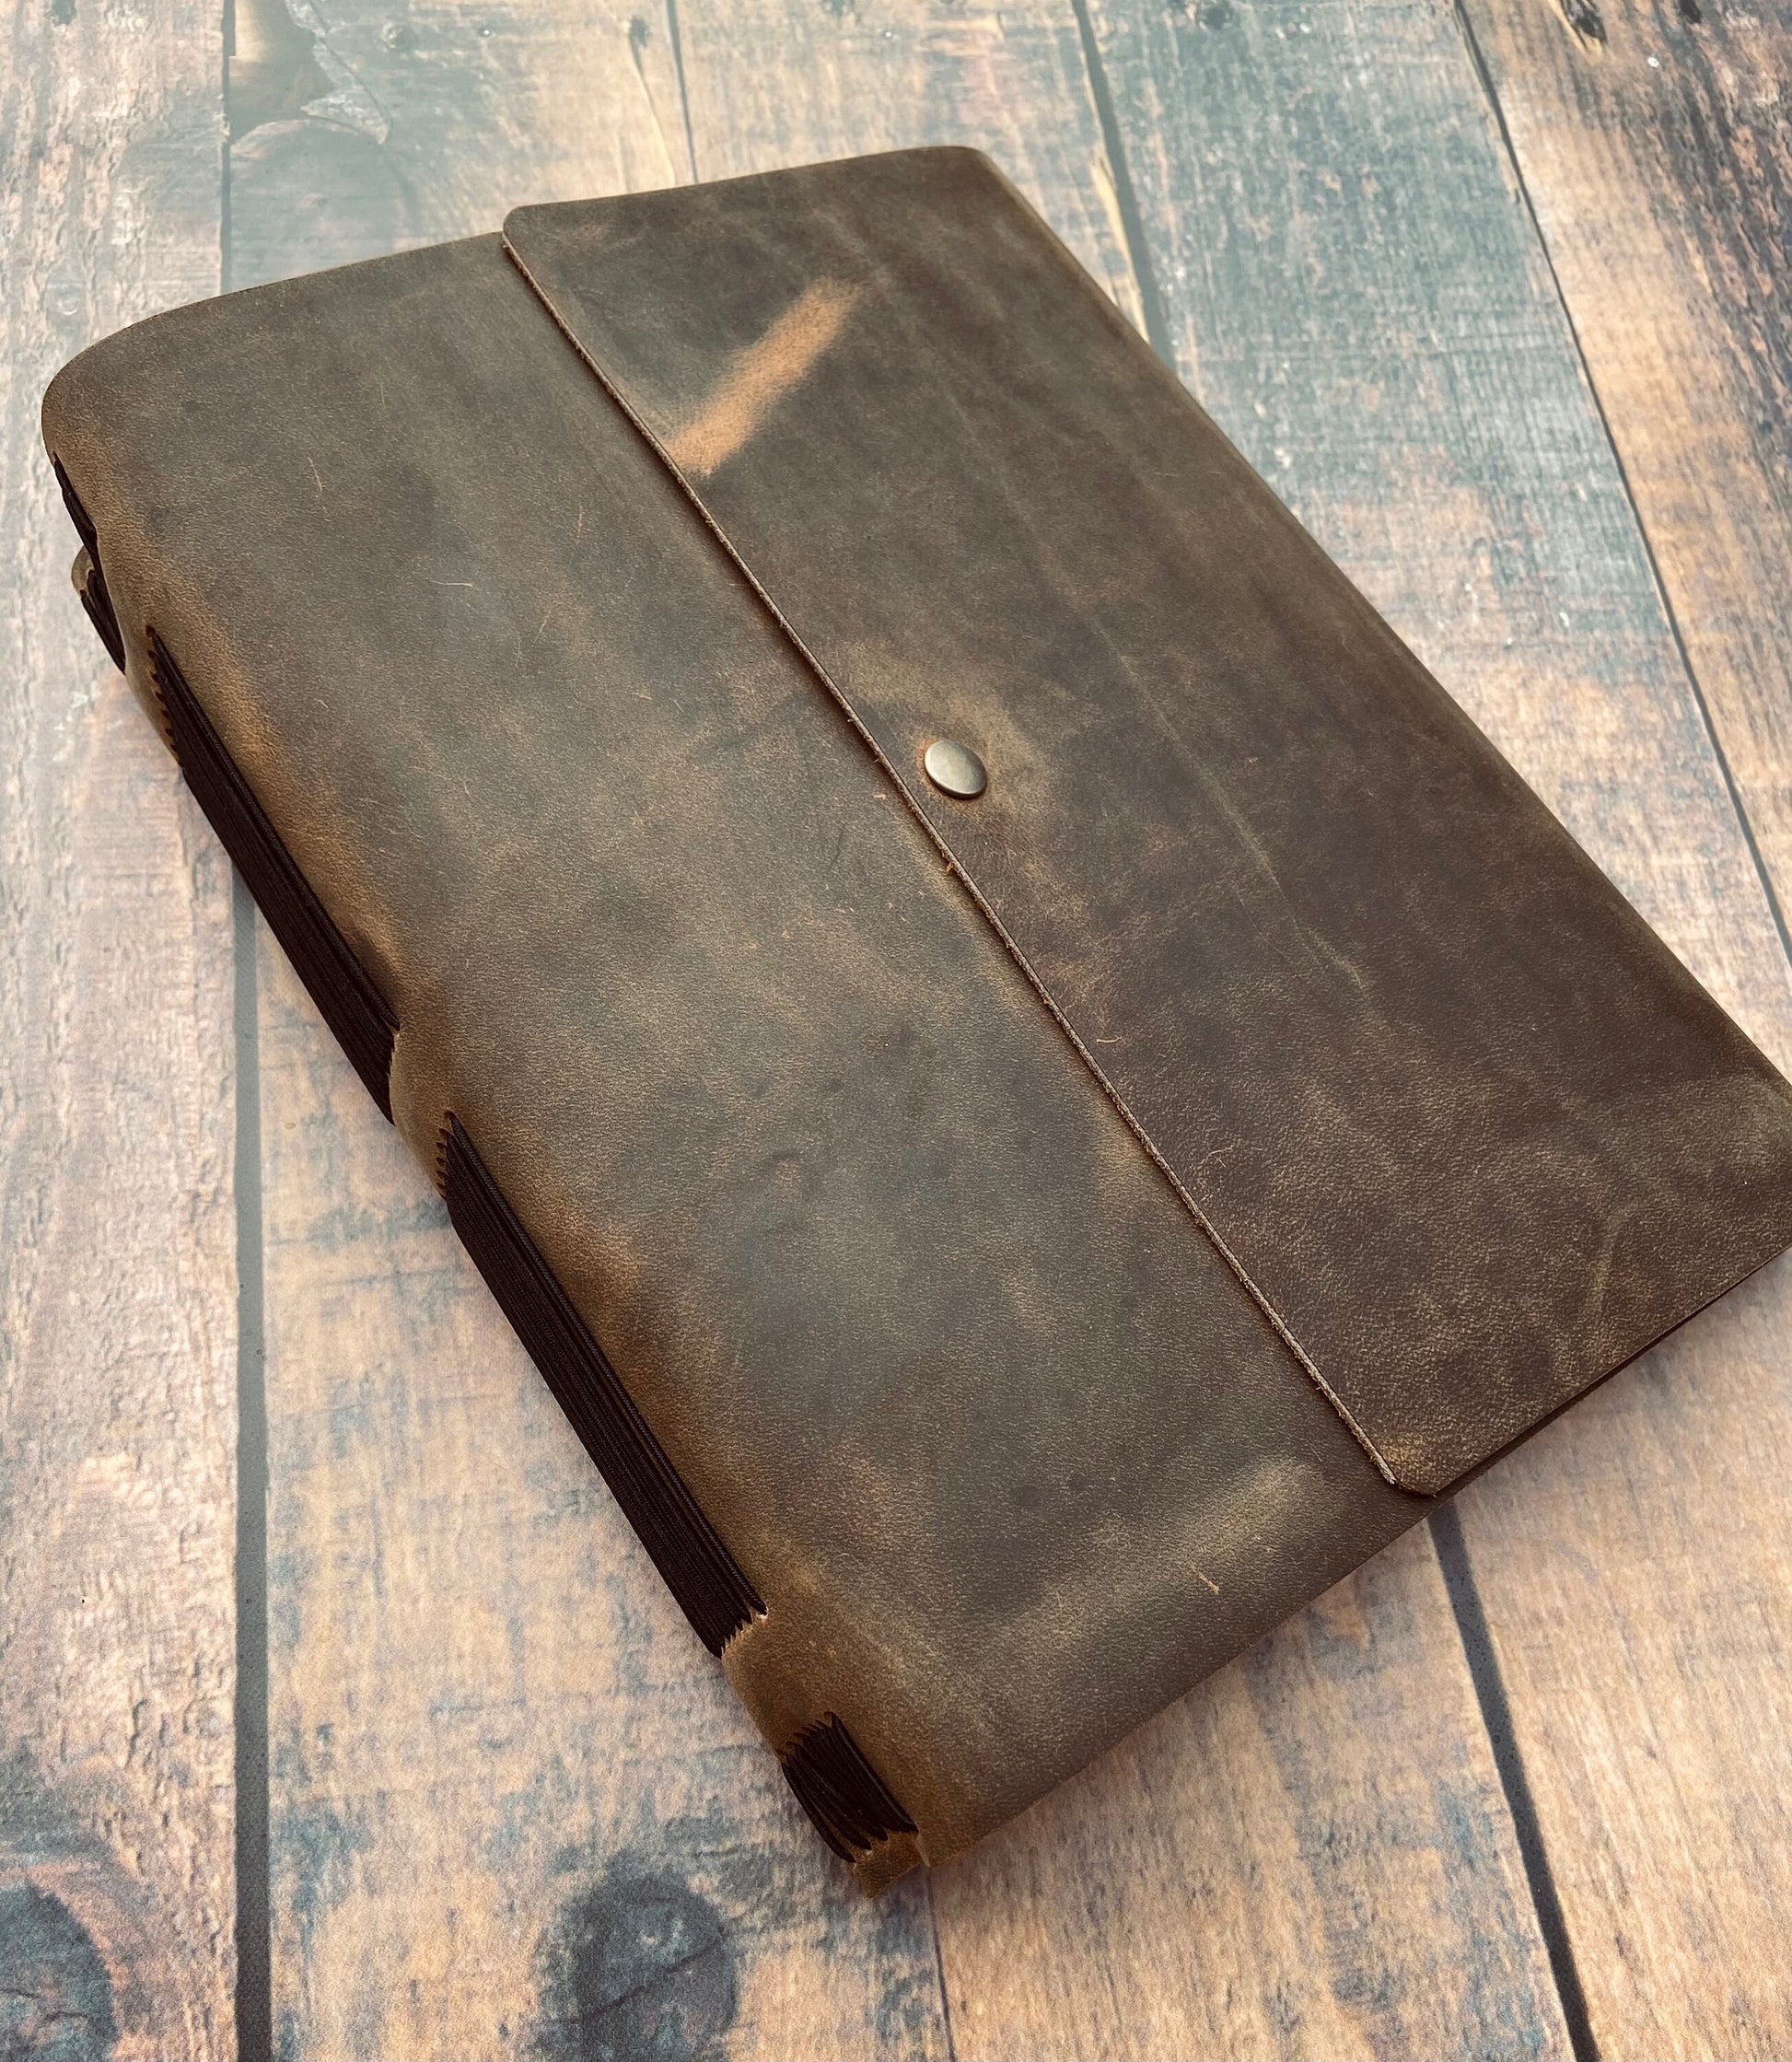 Refillable Leather Journal, Personalized Rustic Writing Diary, Sketch / Watercolor Book, Full Grain Premium Leather Bound, Customizable